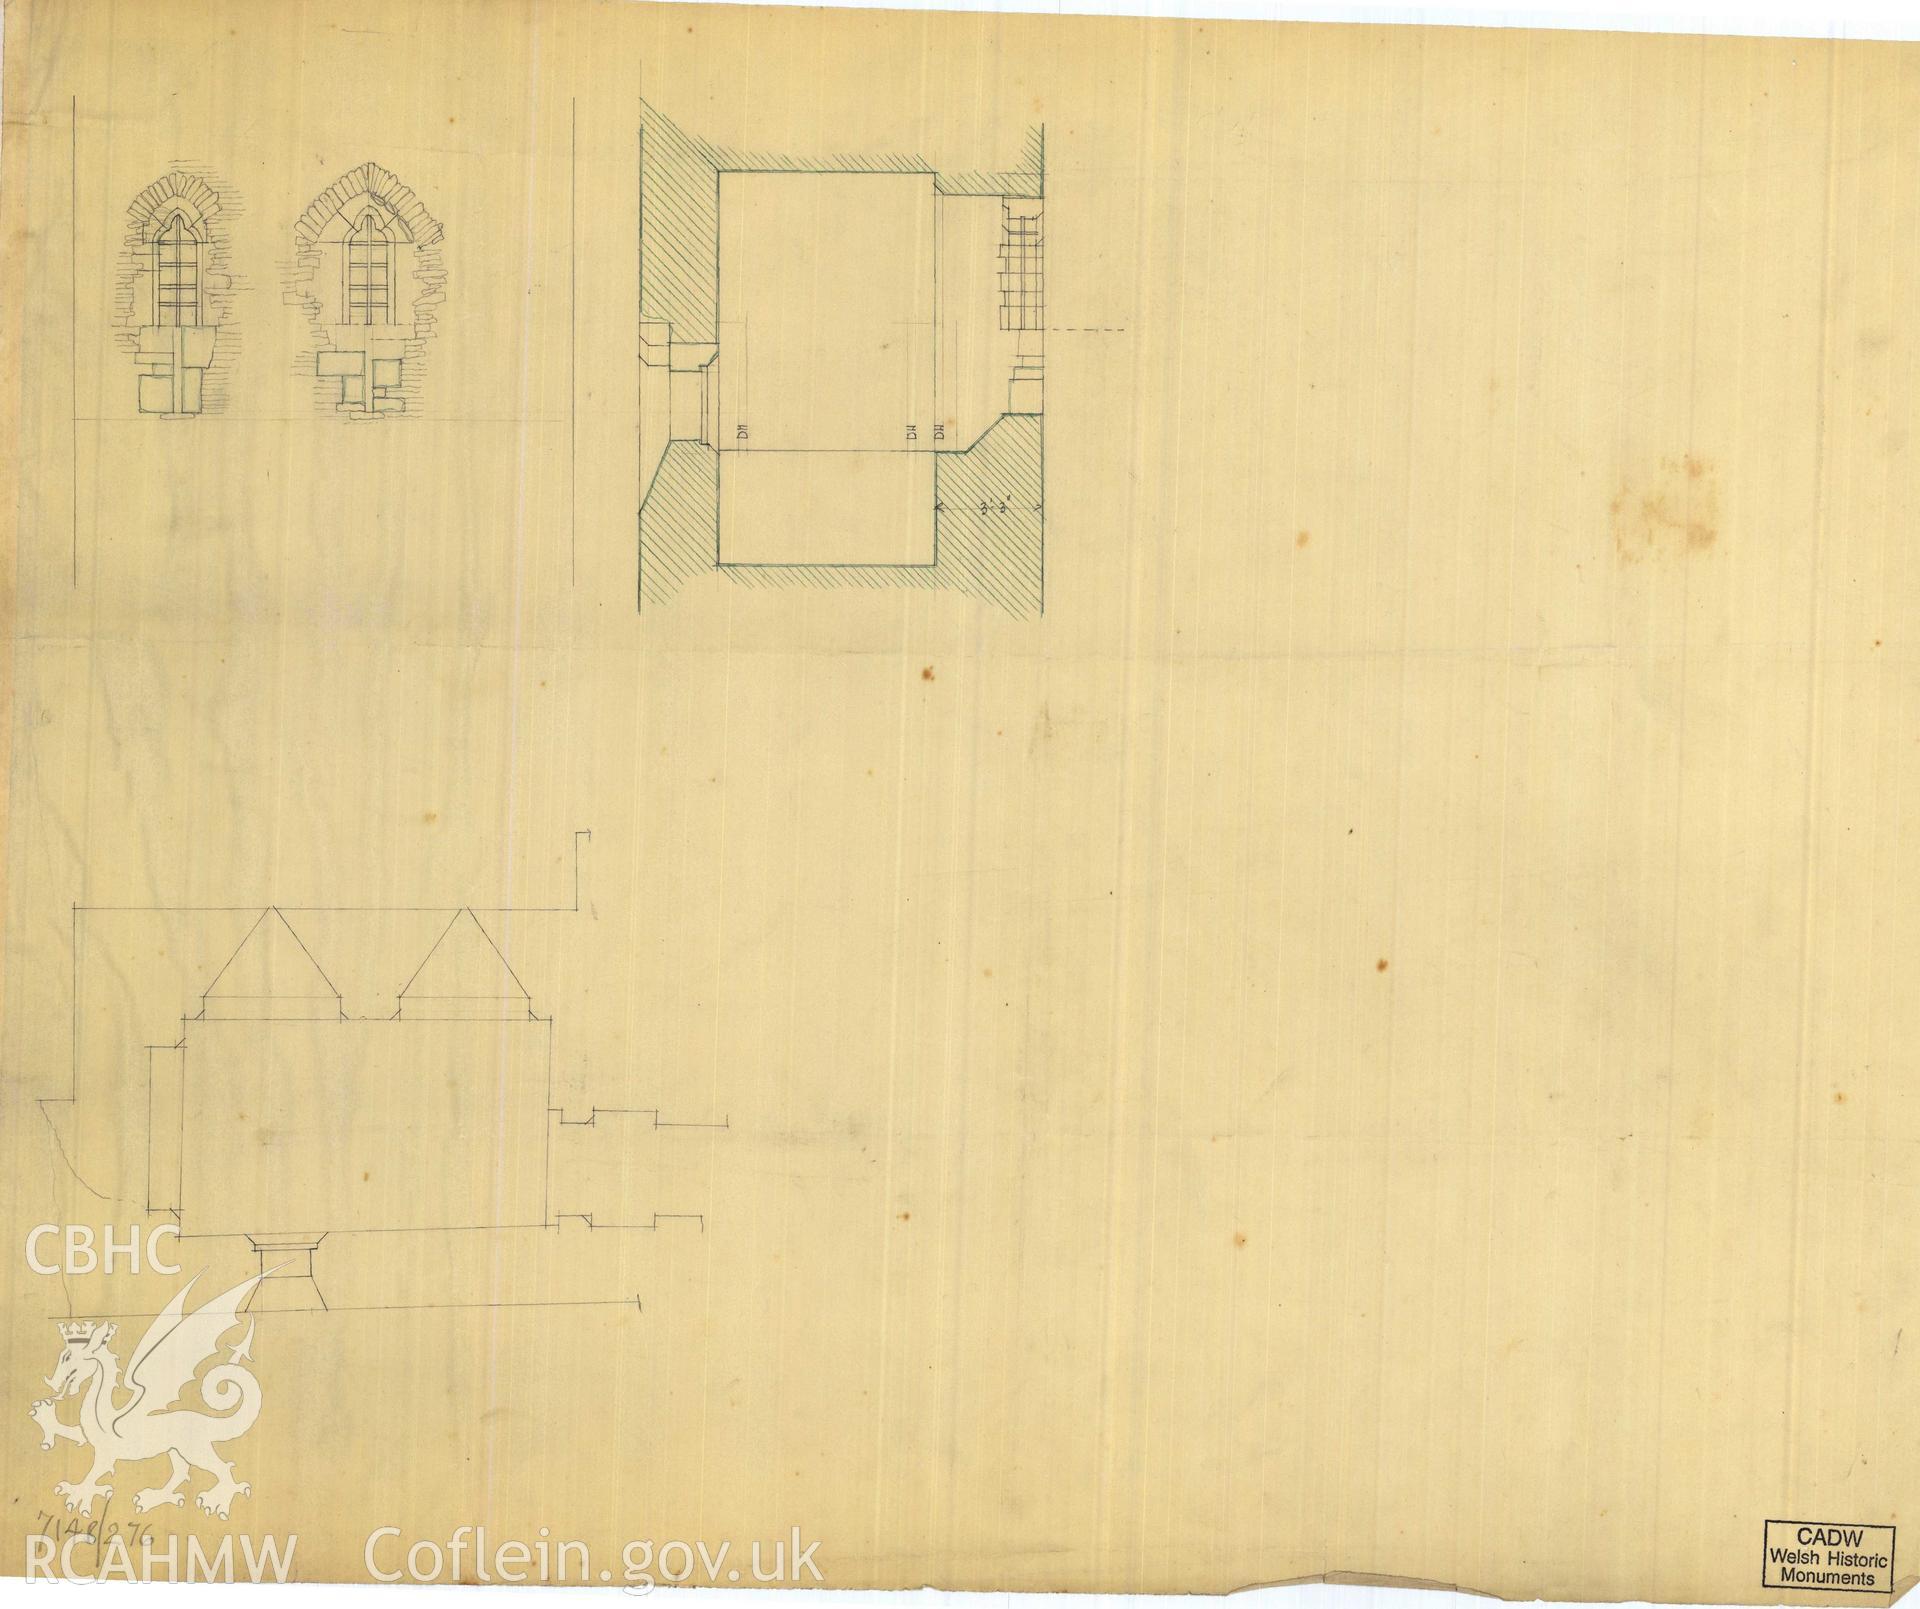 Cadw guardianship monument drawing of Caerphilly Castle. Inner E gate, Oratory N windows. Cadw Ref. No:714B/276. Scale 1:24.